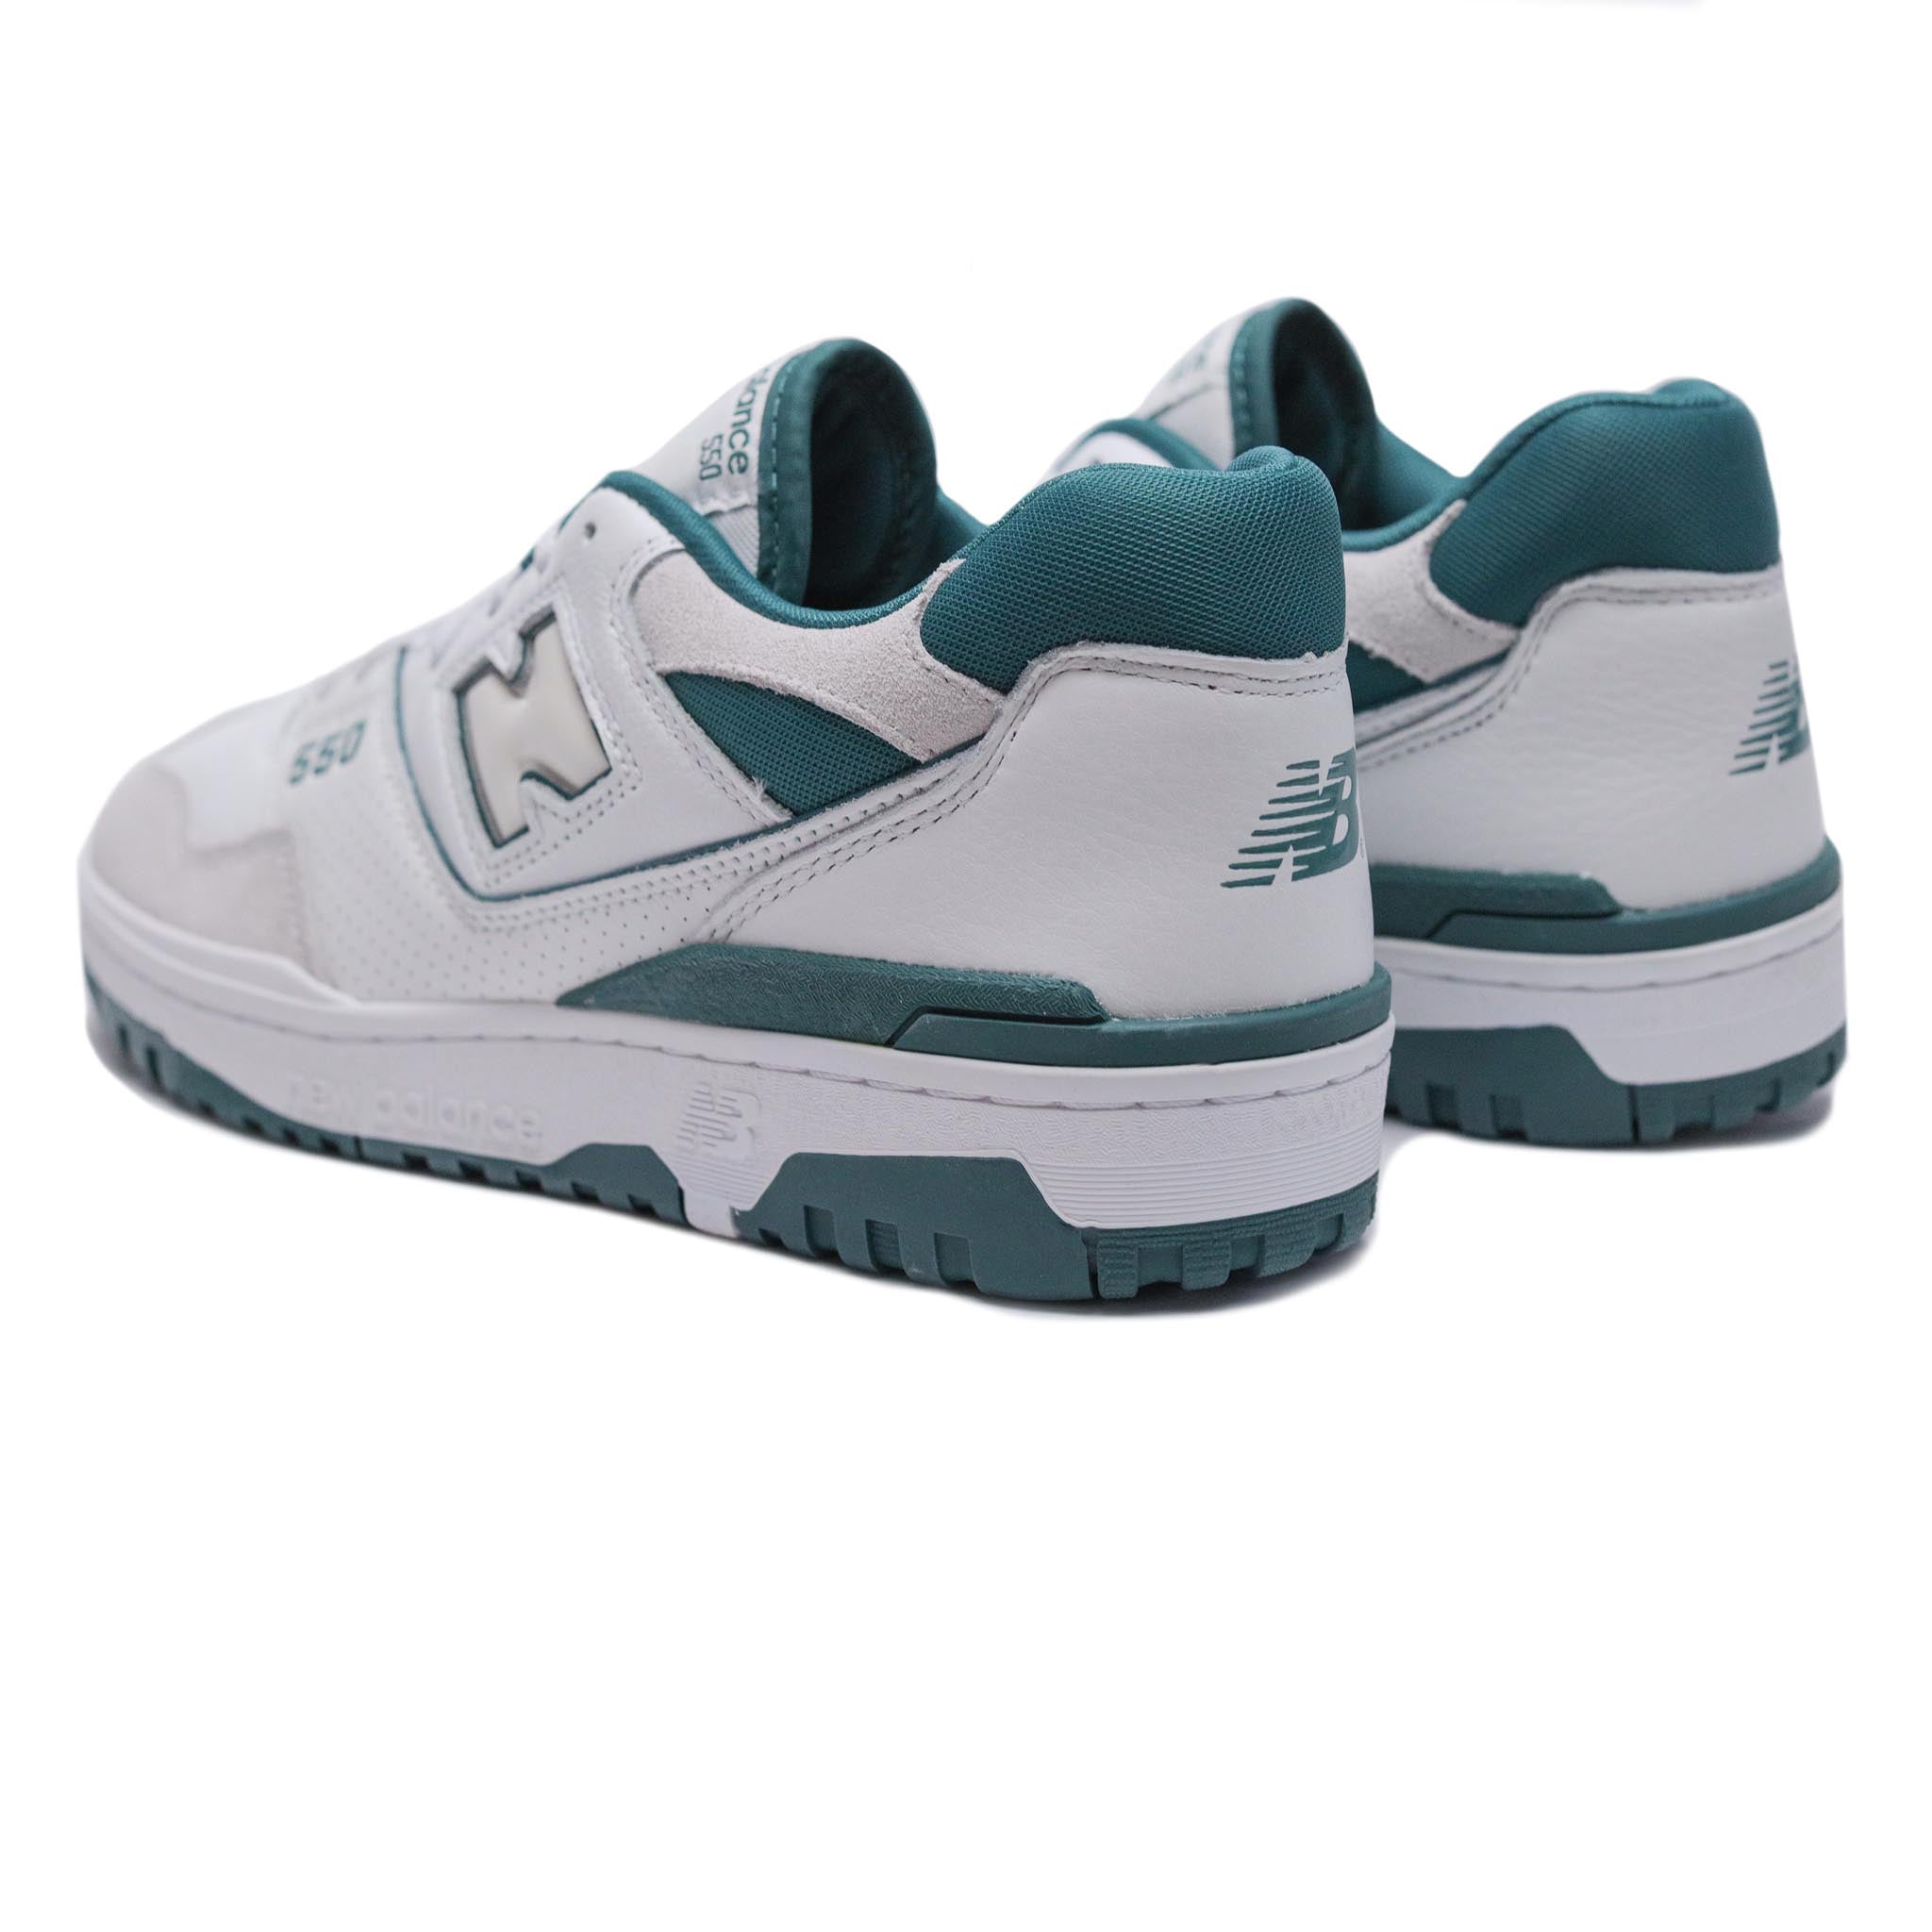 New Balance BB550STA 'Suede Pack' White/Vintage Teal